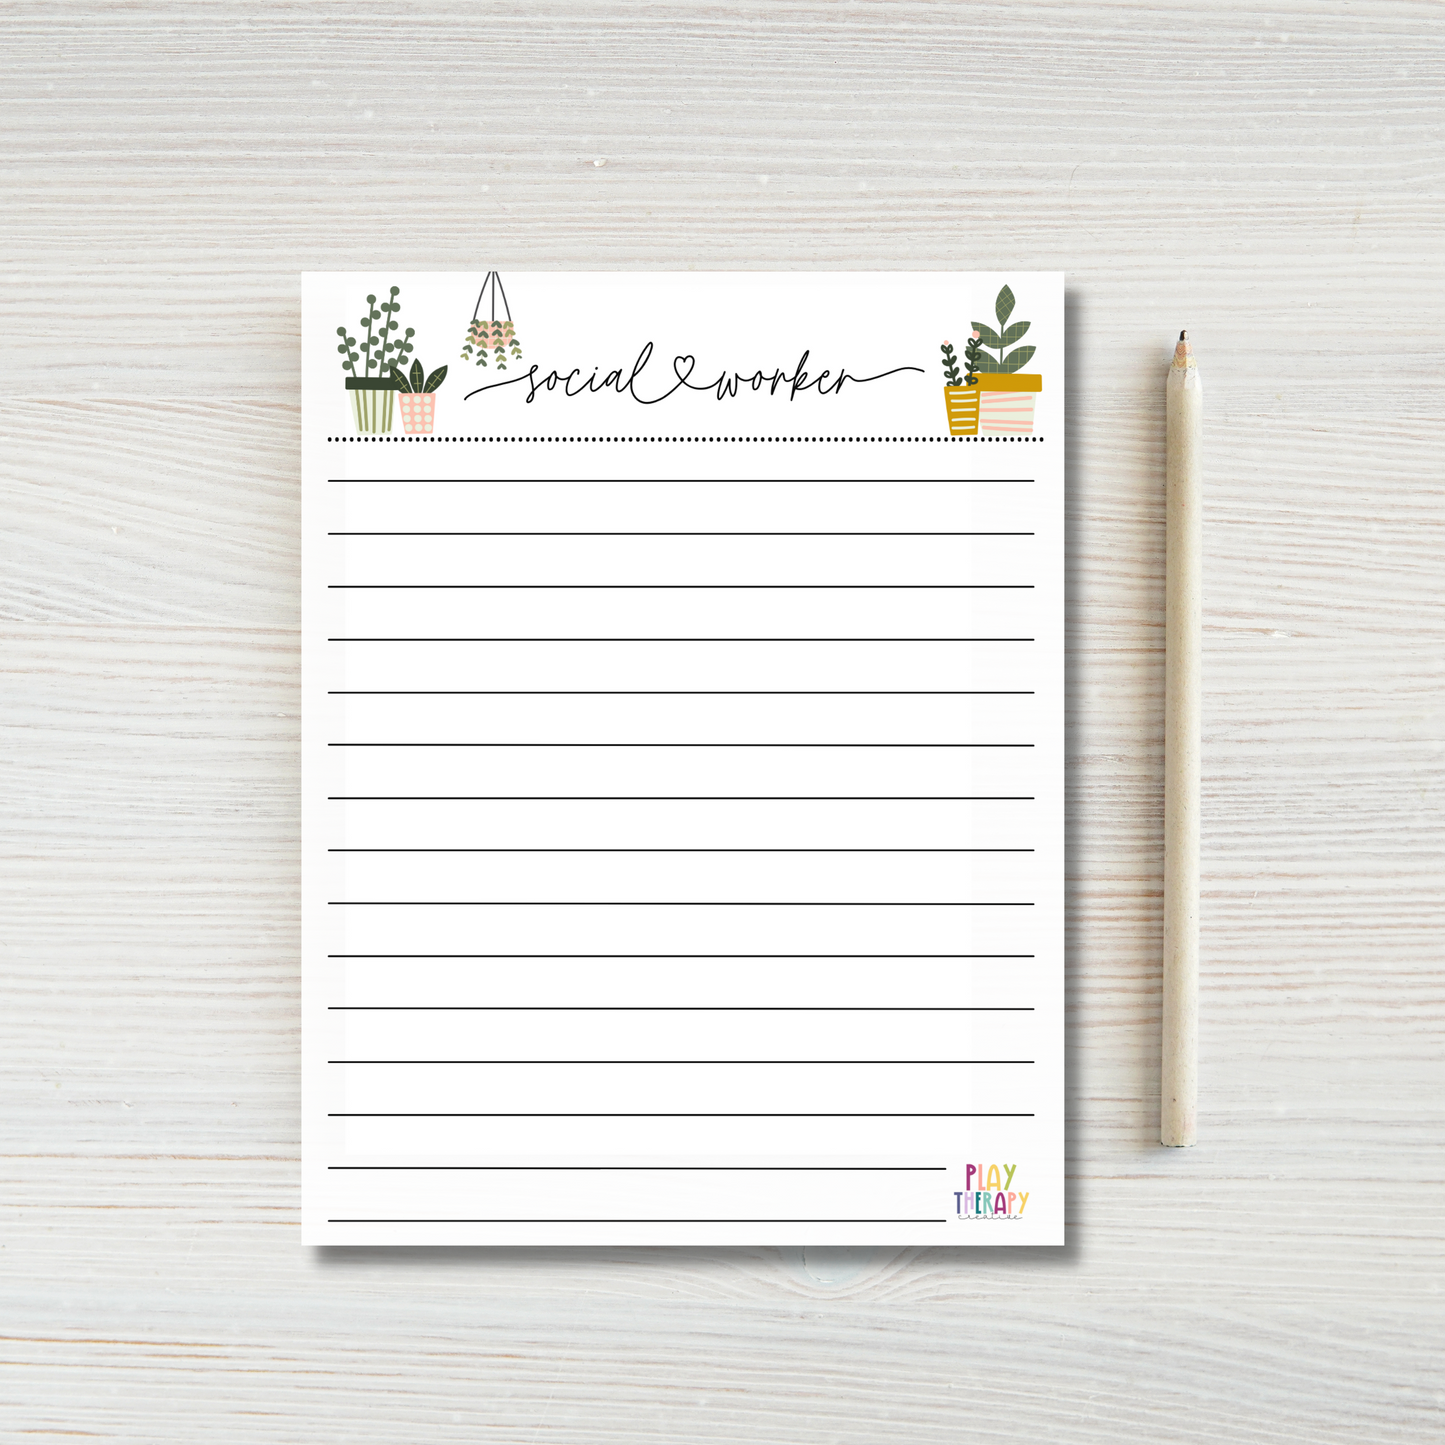 Social Worker Plant Lover Notepad